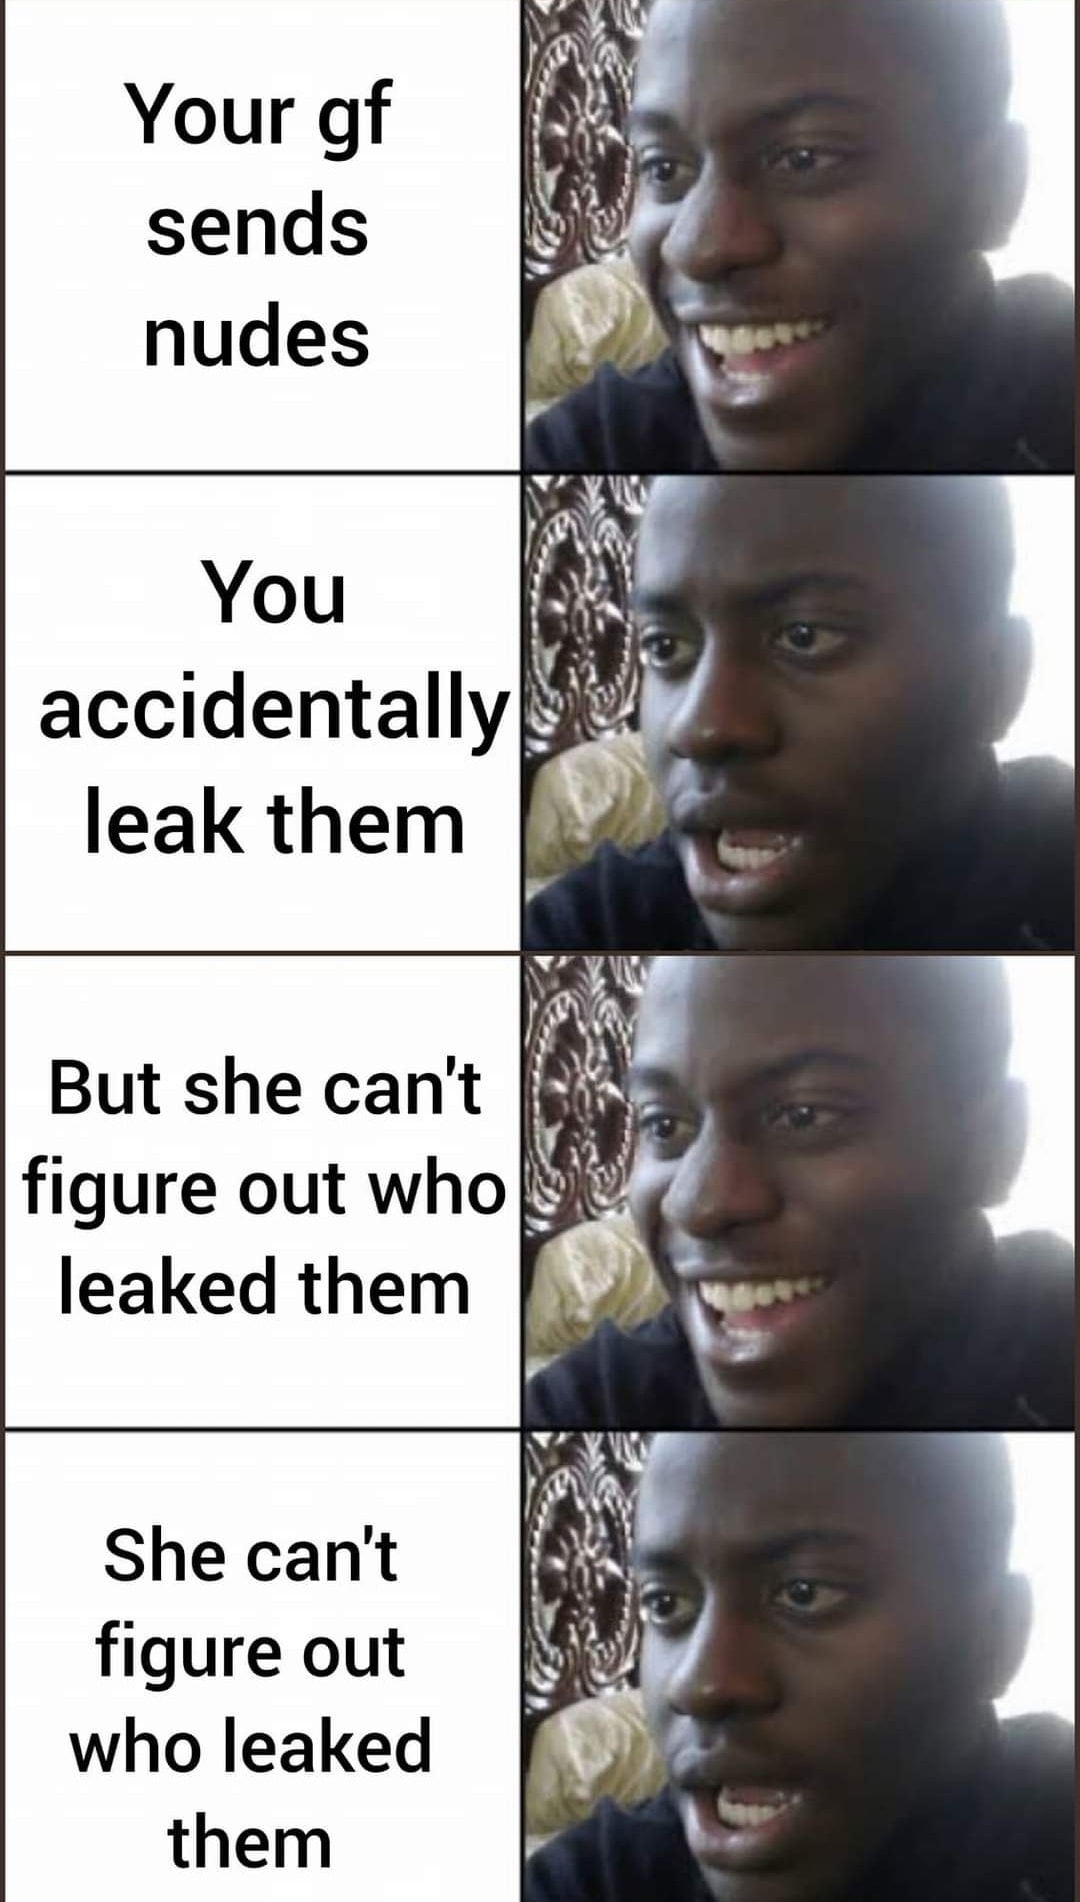 smile - Your gf sends nudes You accidentally leak them But she can't figure out who leaked them She can't figure out who leaked them